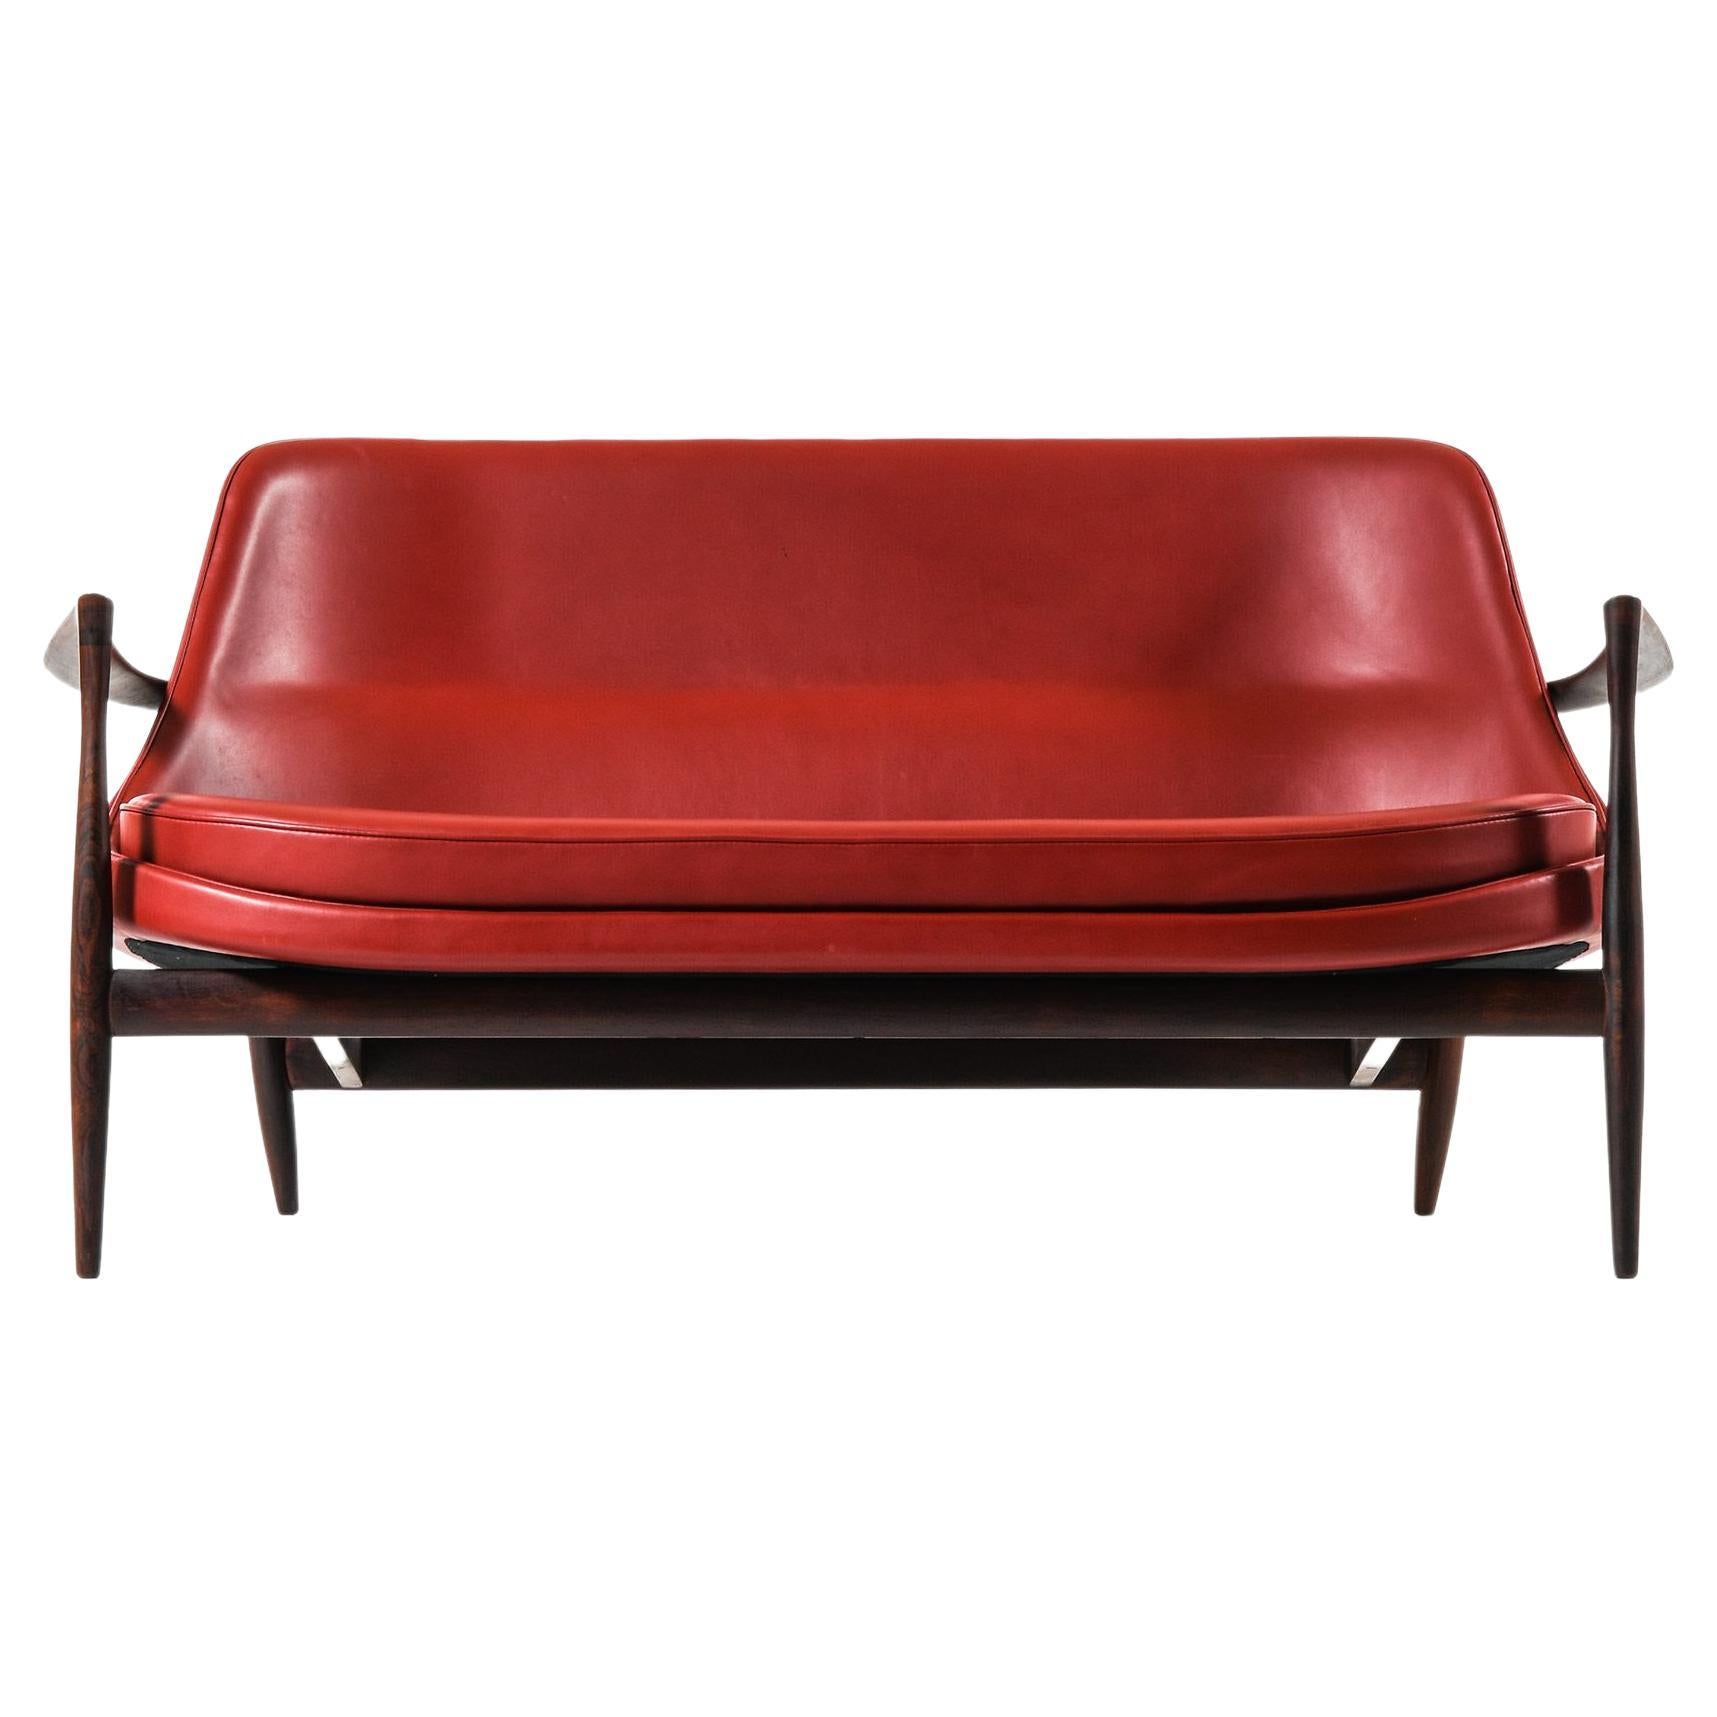 Sofa in Rosewood and Reupholstered in Burgundy Leather by Ib Kofod-Larsen, 1956 For Sale